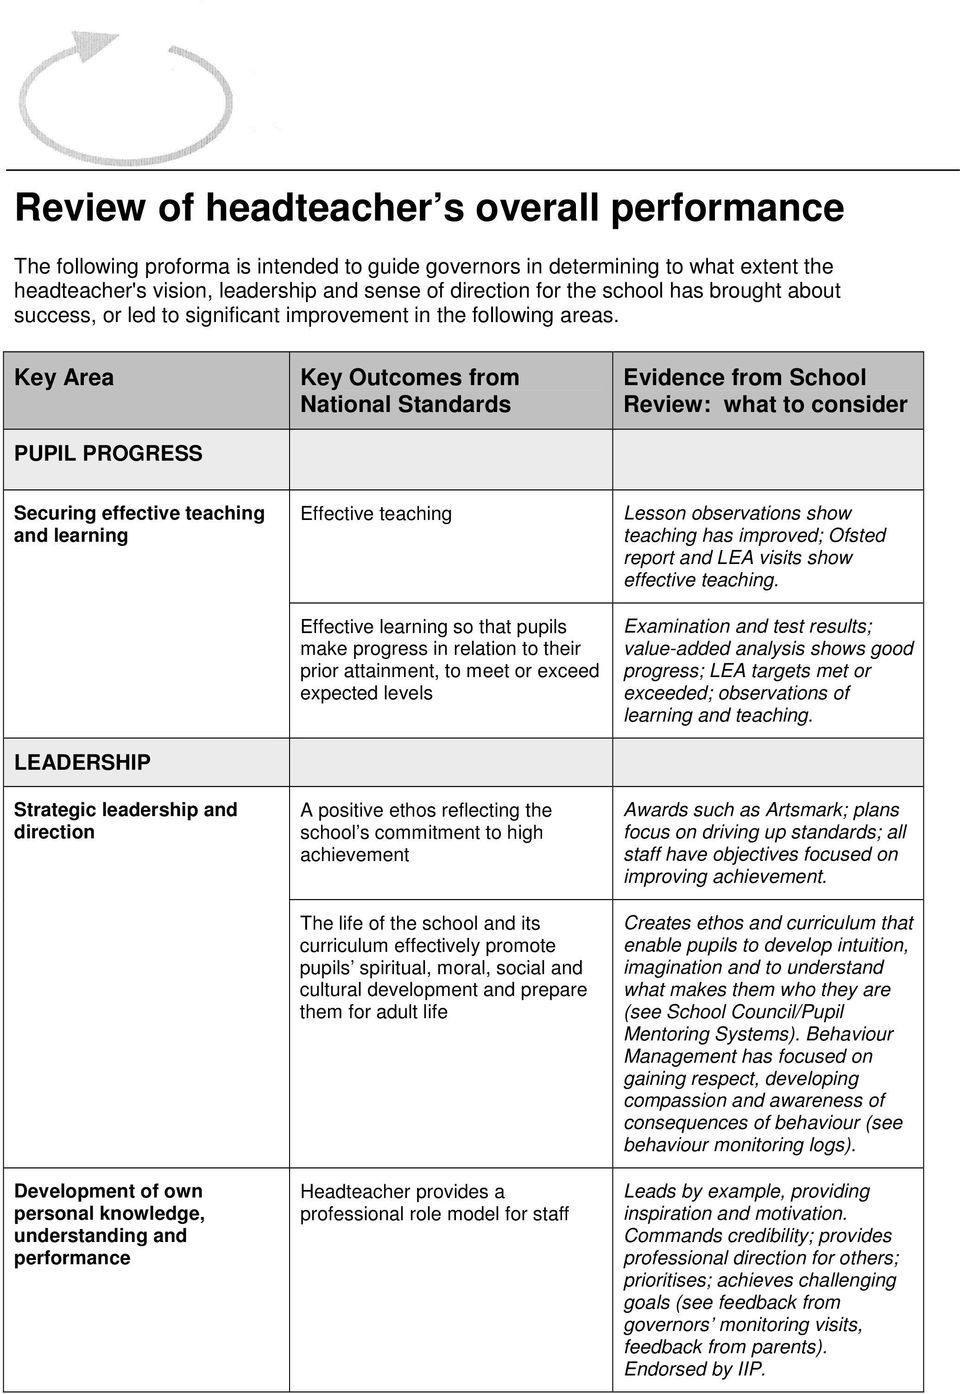 Key Area PUPIL PROGRESS Key Outcomes from National Standards Evidence from School Review: what to consider Securing effective teaching and learning LEADERSHIP Strategic leadership and direction